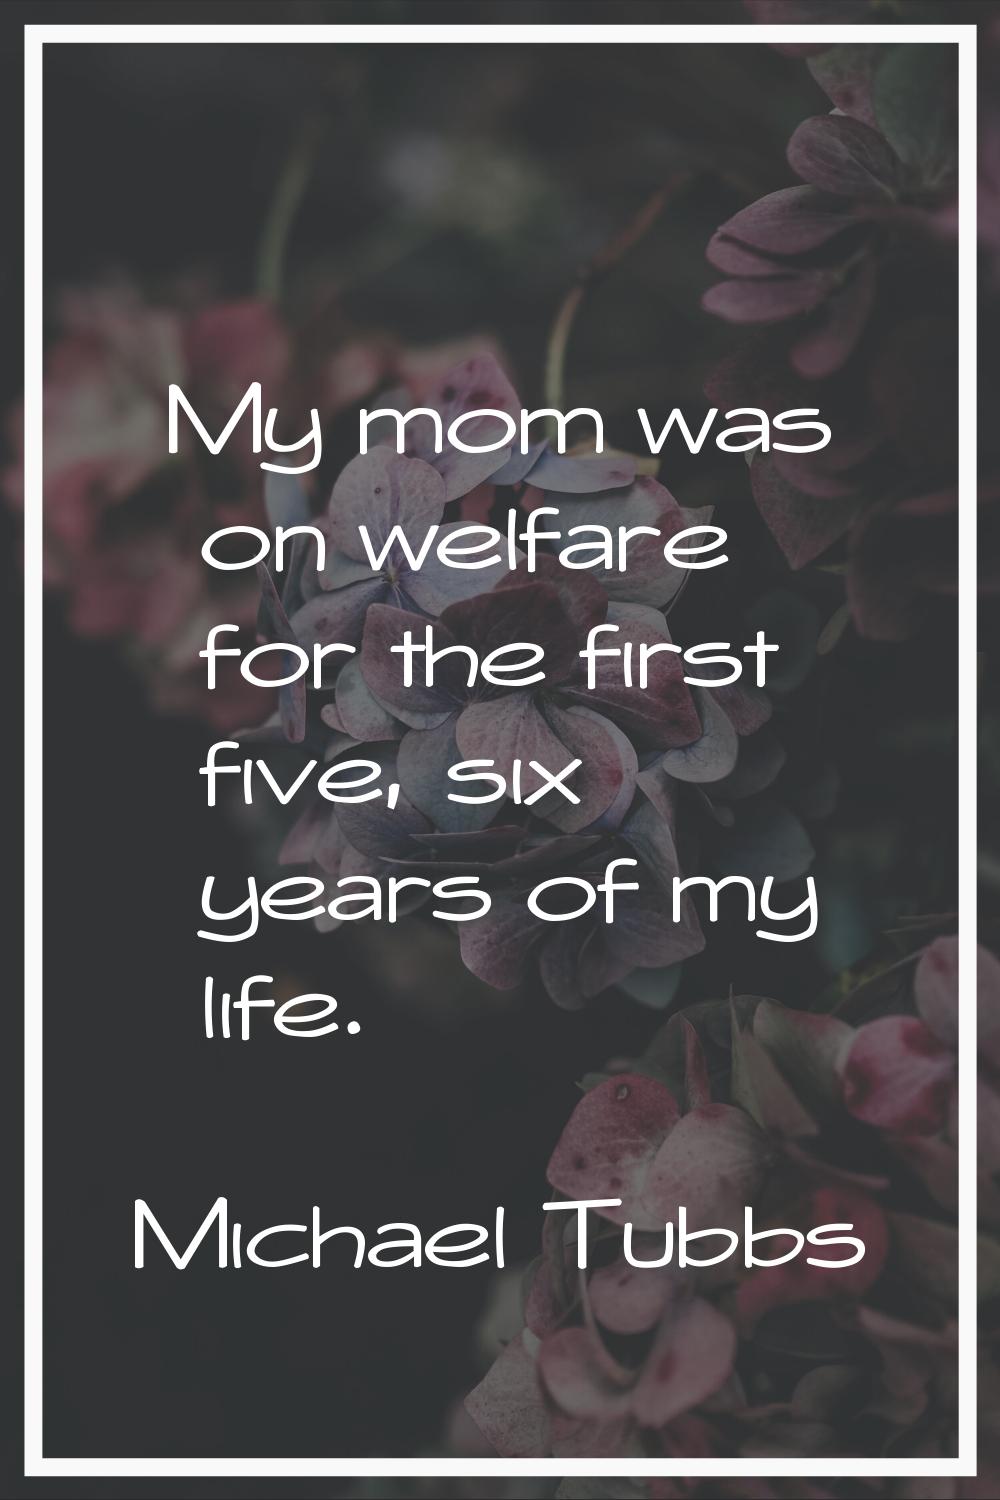 My mom was on welfare for the first five, six years of my life.